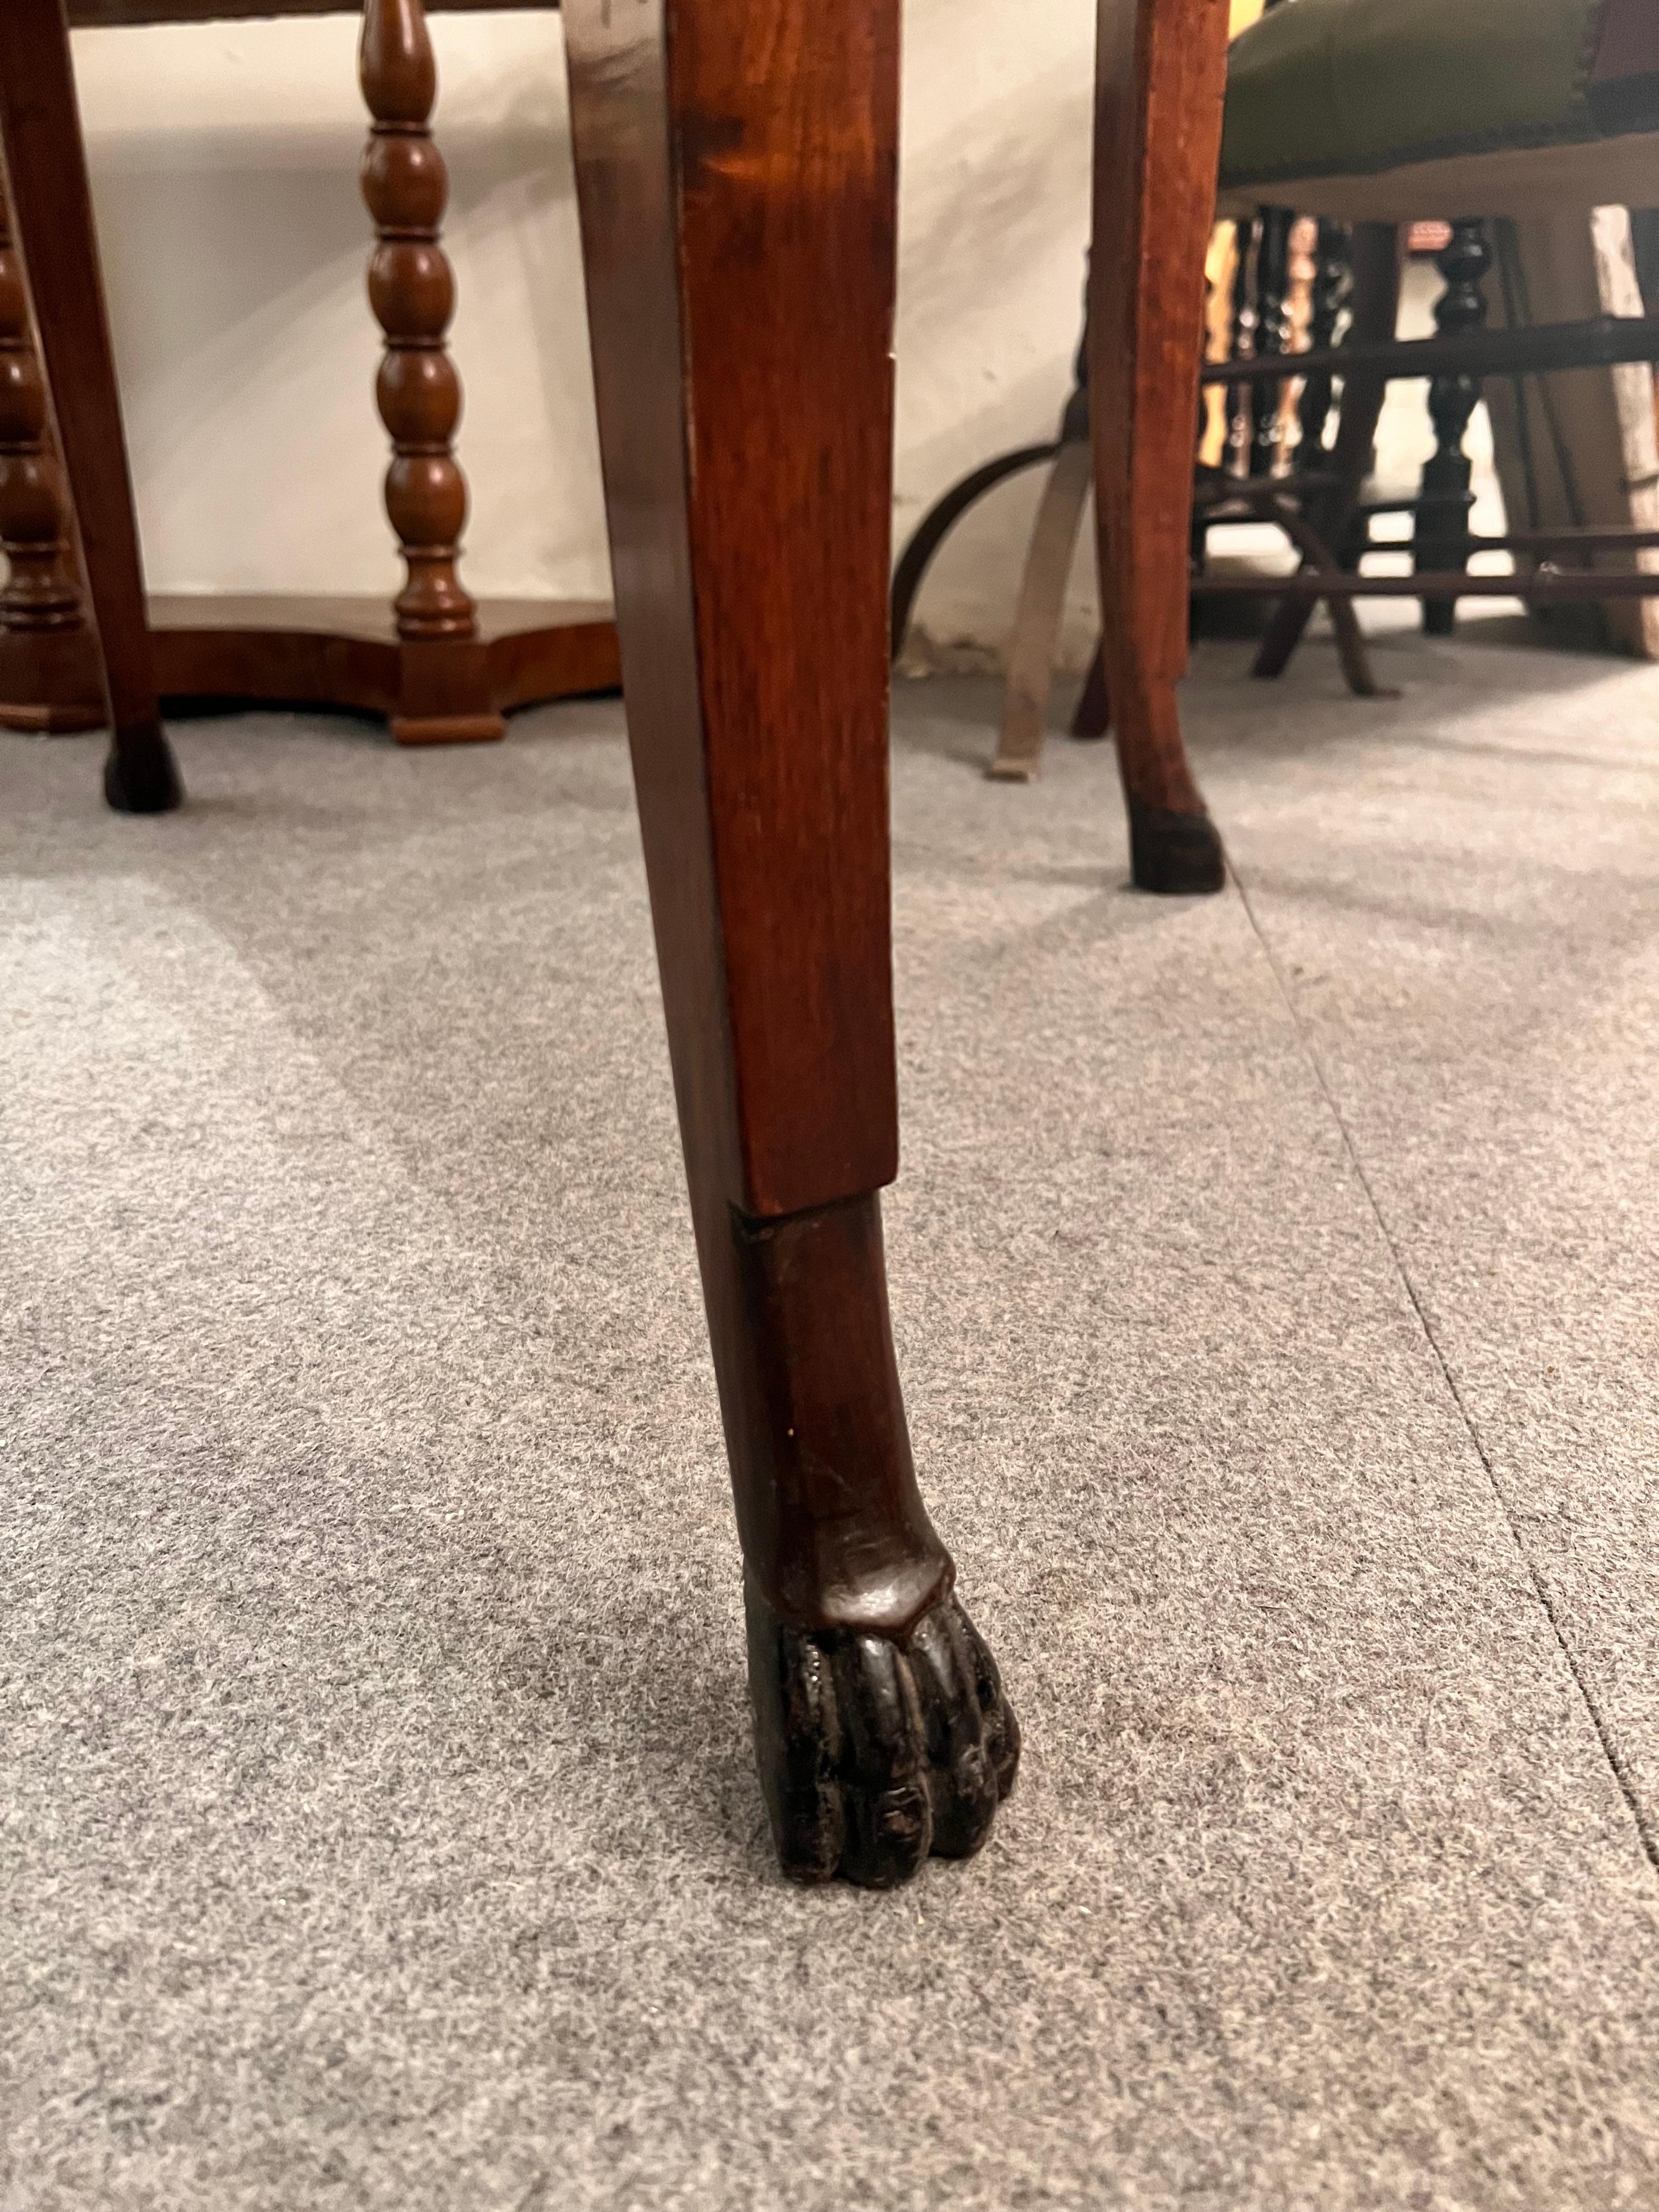 Elegant circular table supported by four truncated pyramid legs resting on feral feet. A drawer in the band with a small bronze knob.

Entirely veneered in walnut and finely inlaid with floral and vegetable motifs in fruit wood, the top has an